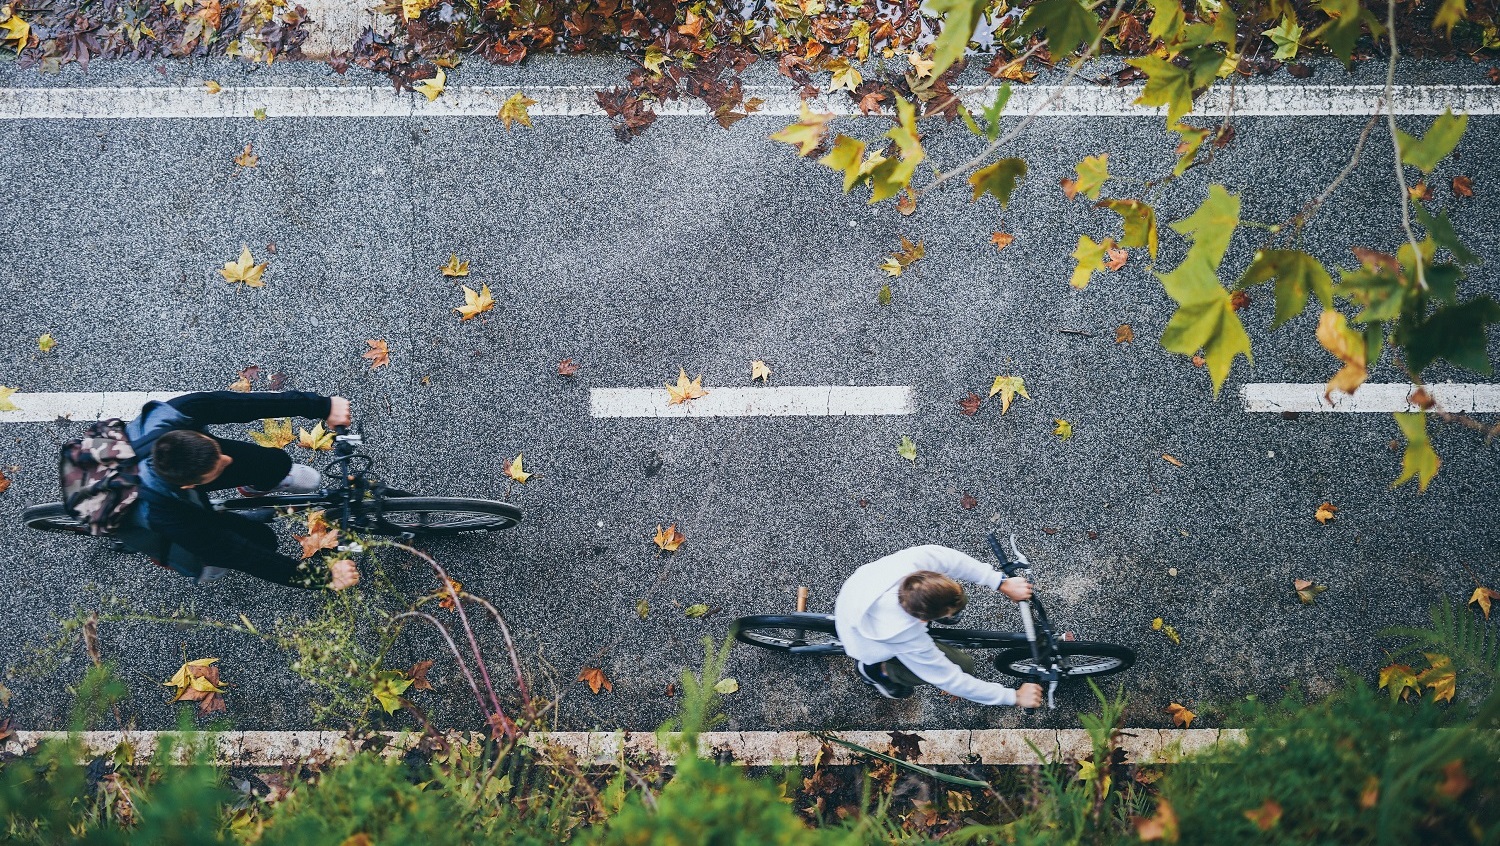 Cyclists riding on a road